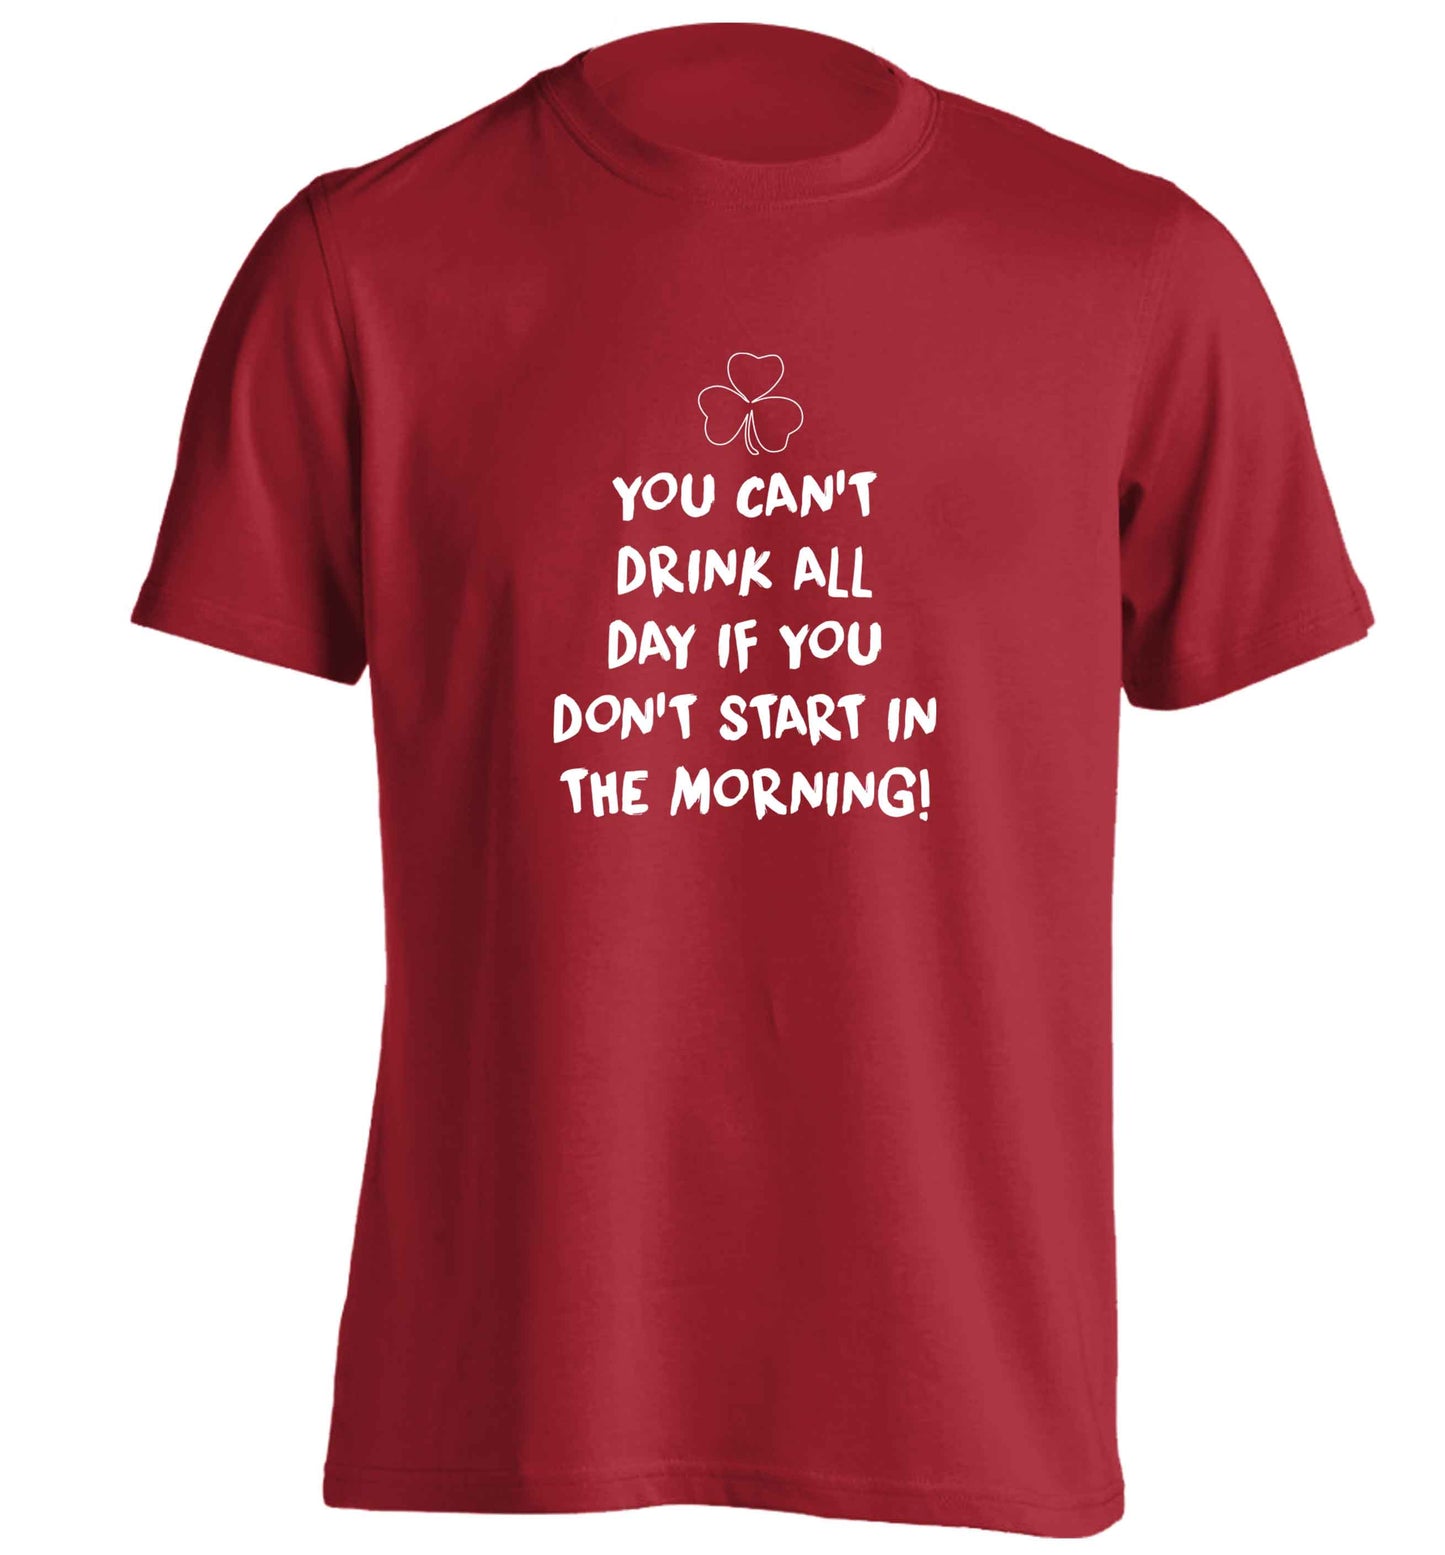 You can't drink all day if you don't start in the morning adults unisex red Tshirt 2XL